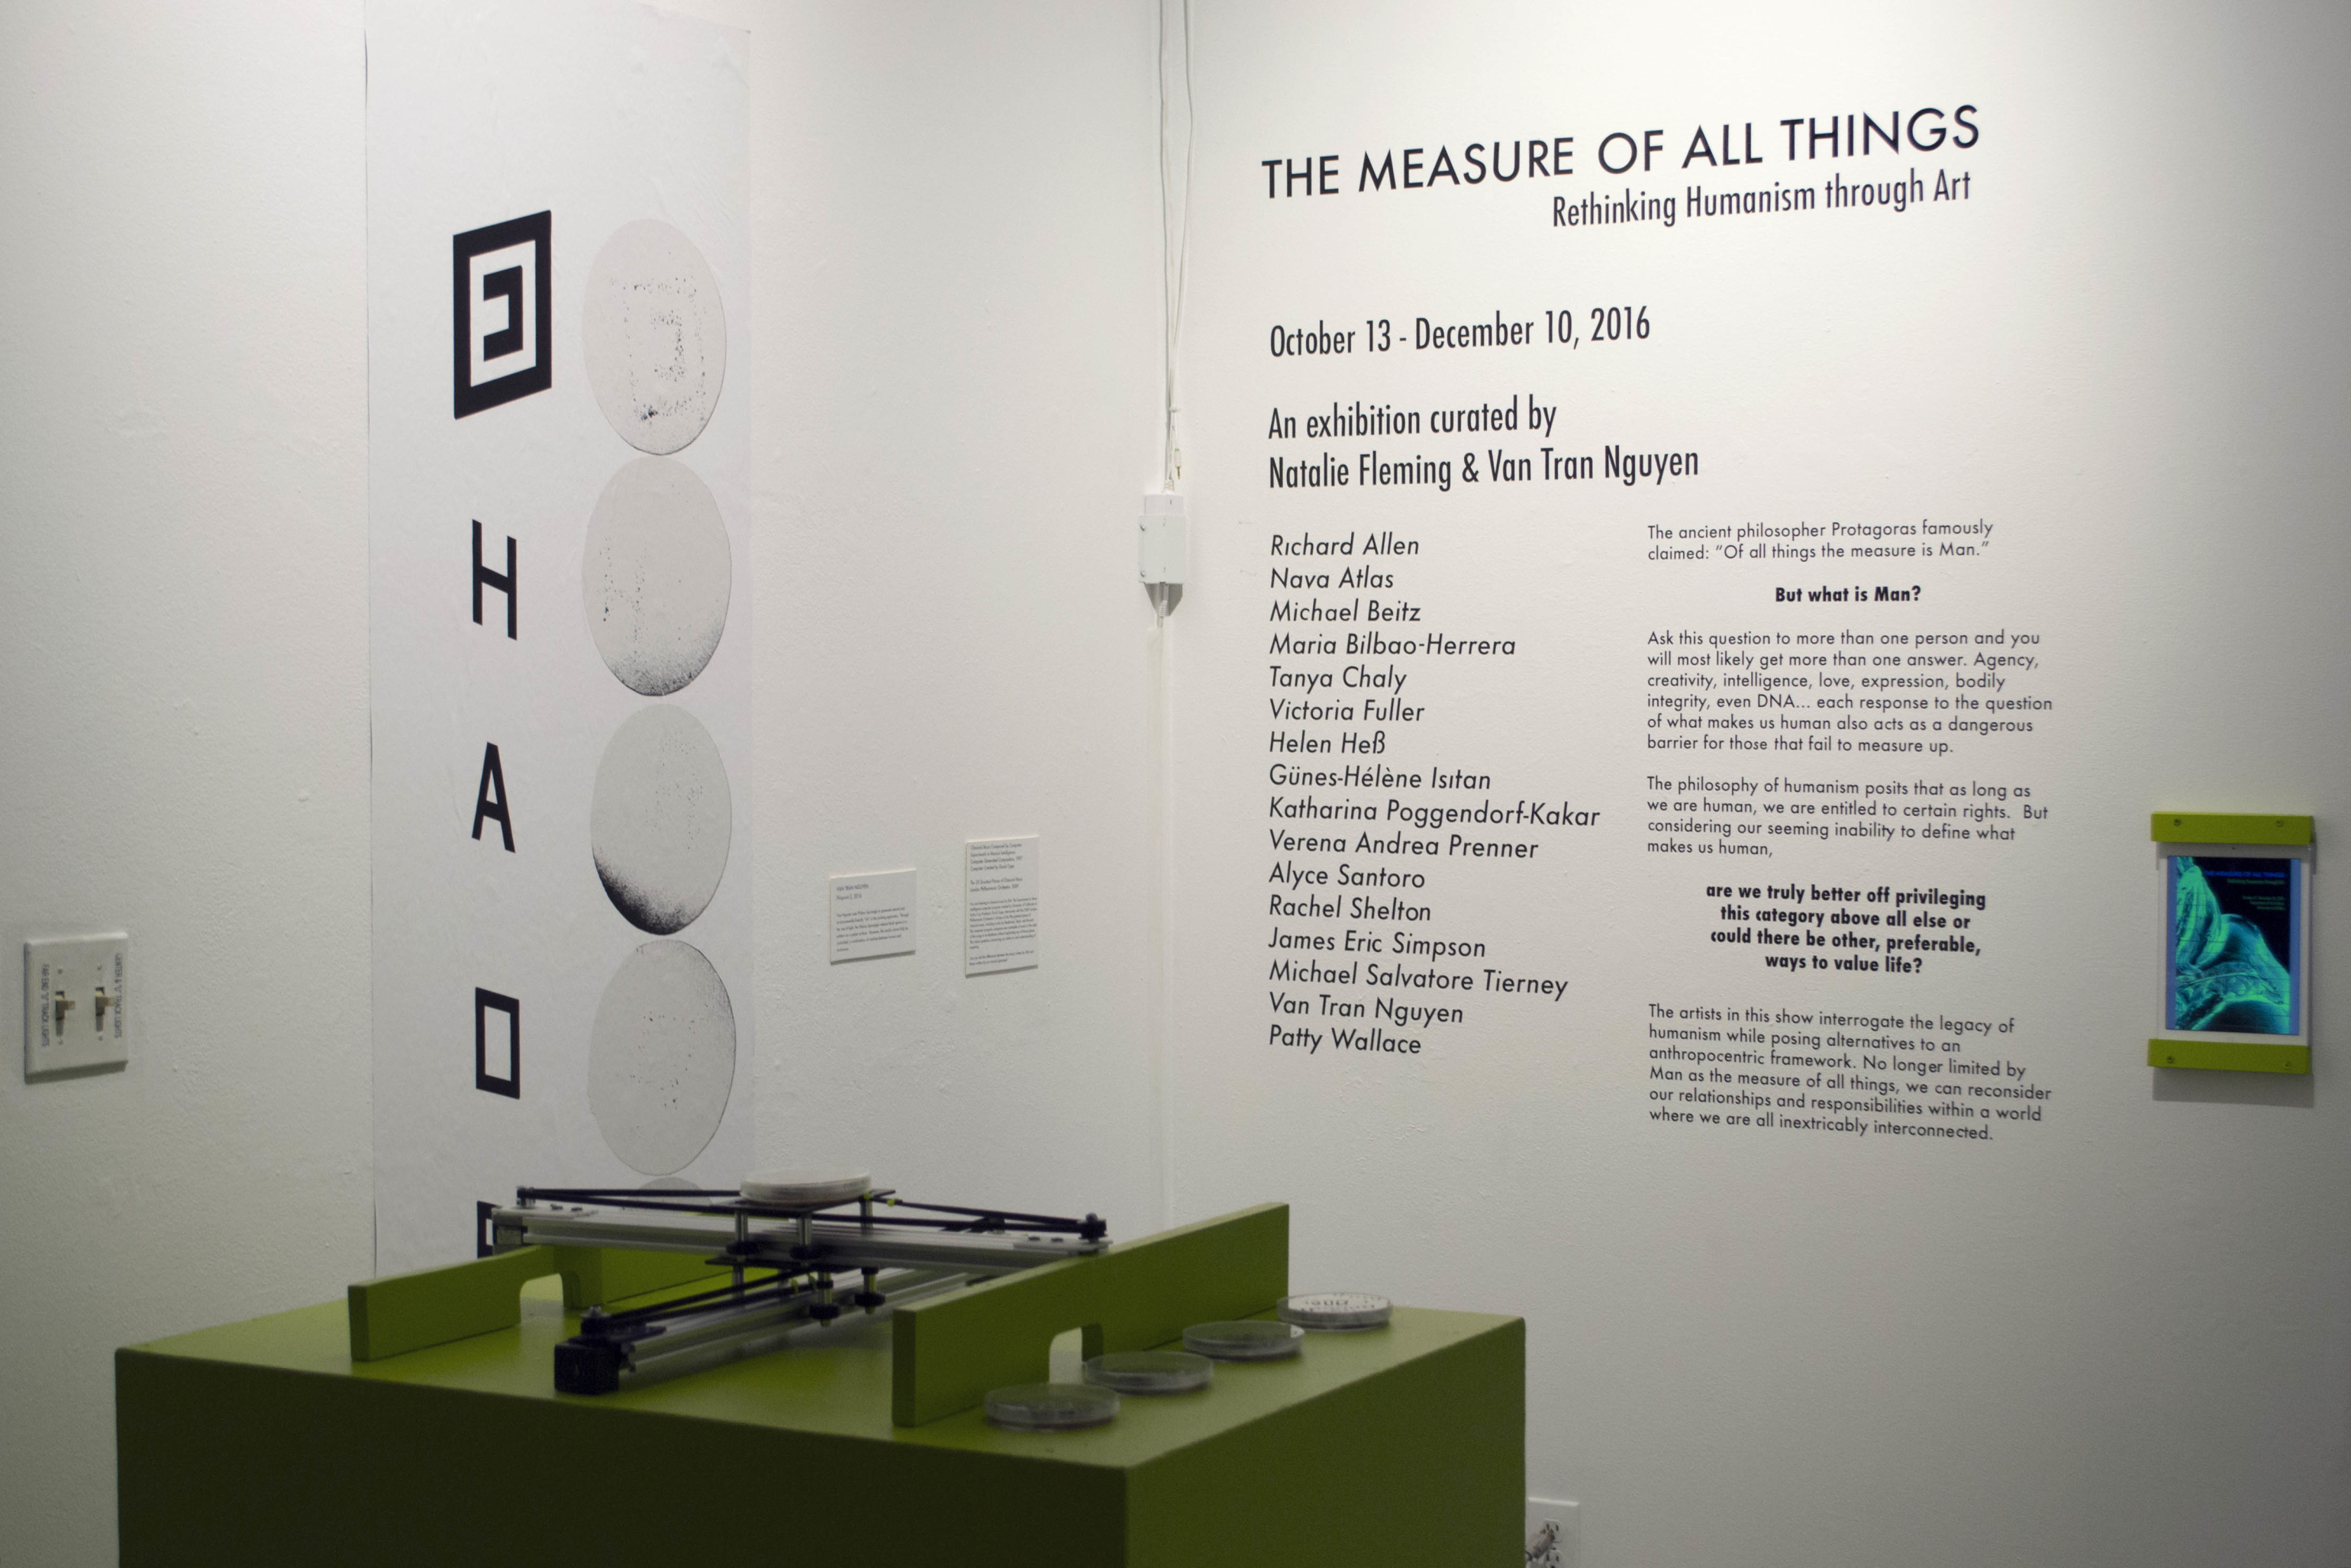 RH.6 THE MEASURE OF ALL THINGS: RETHINKING HUMANISM THROUGH ART